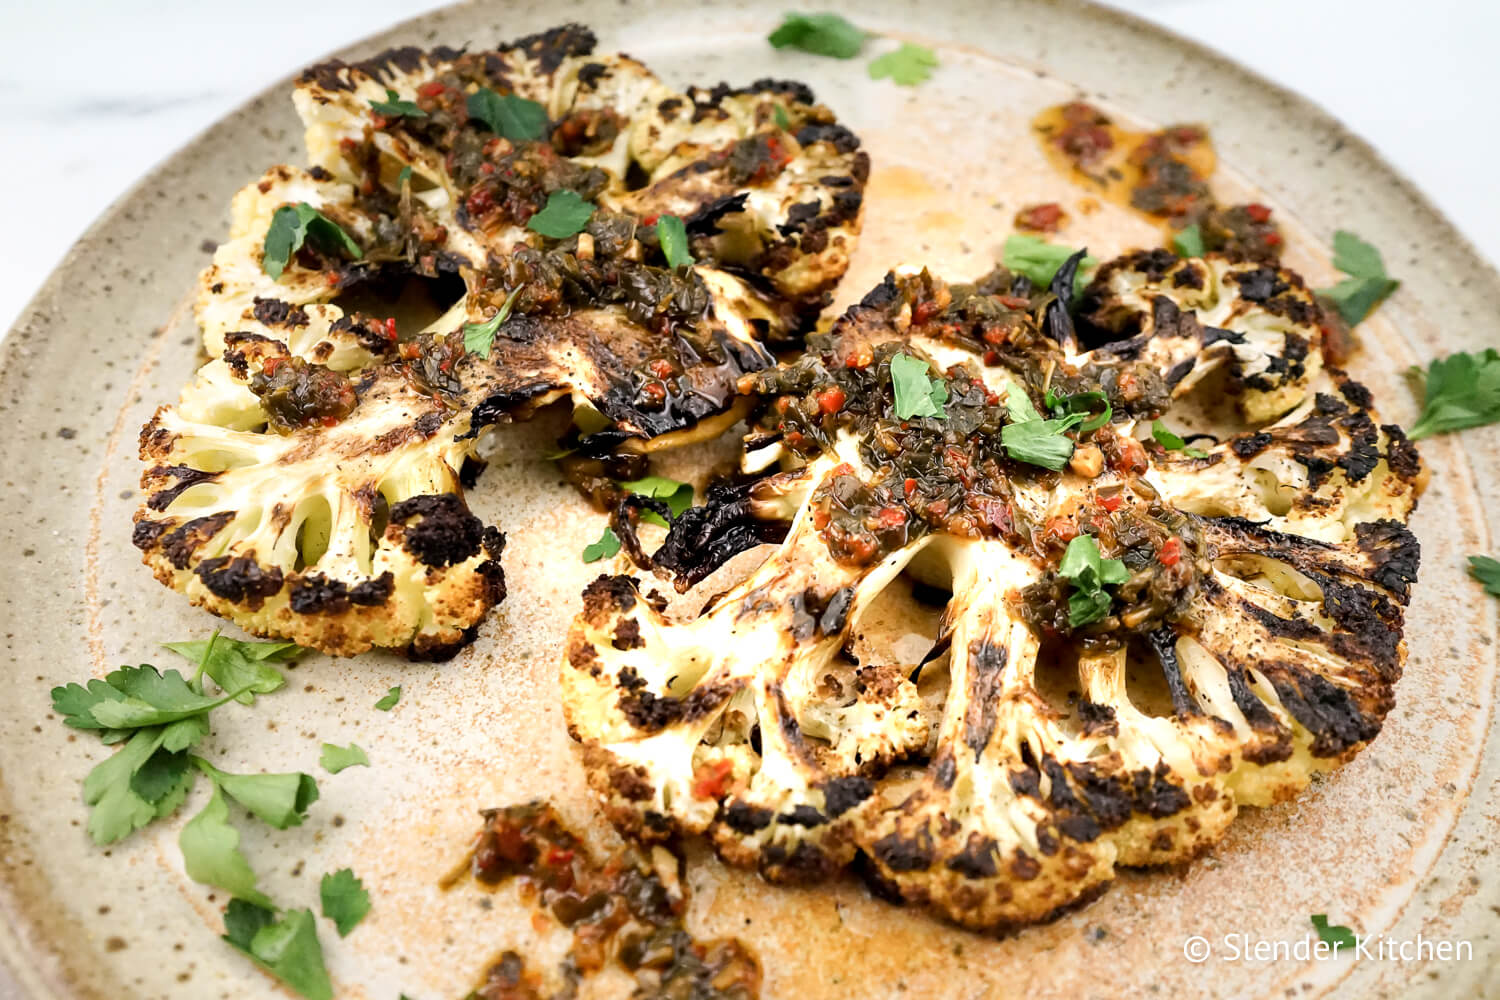 Cauliflower steaks served with chimmichurri on speckled gray plate.